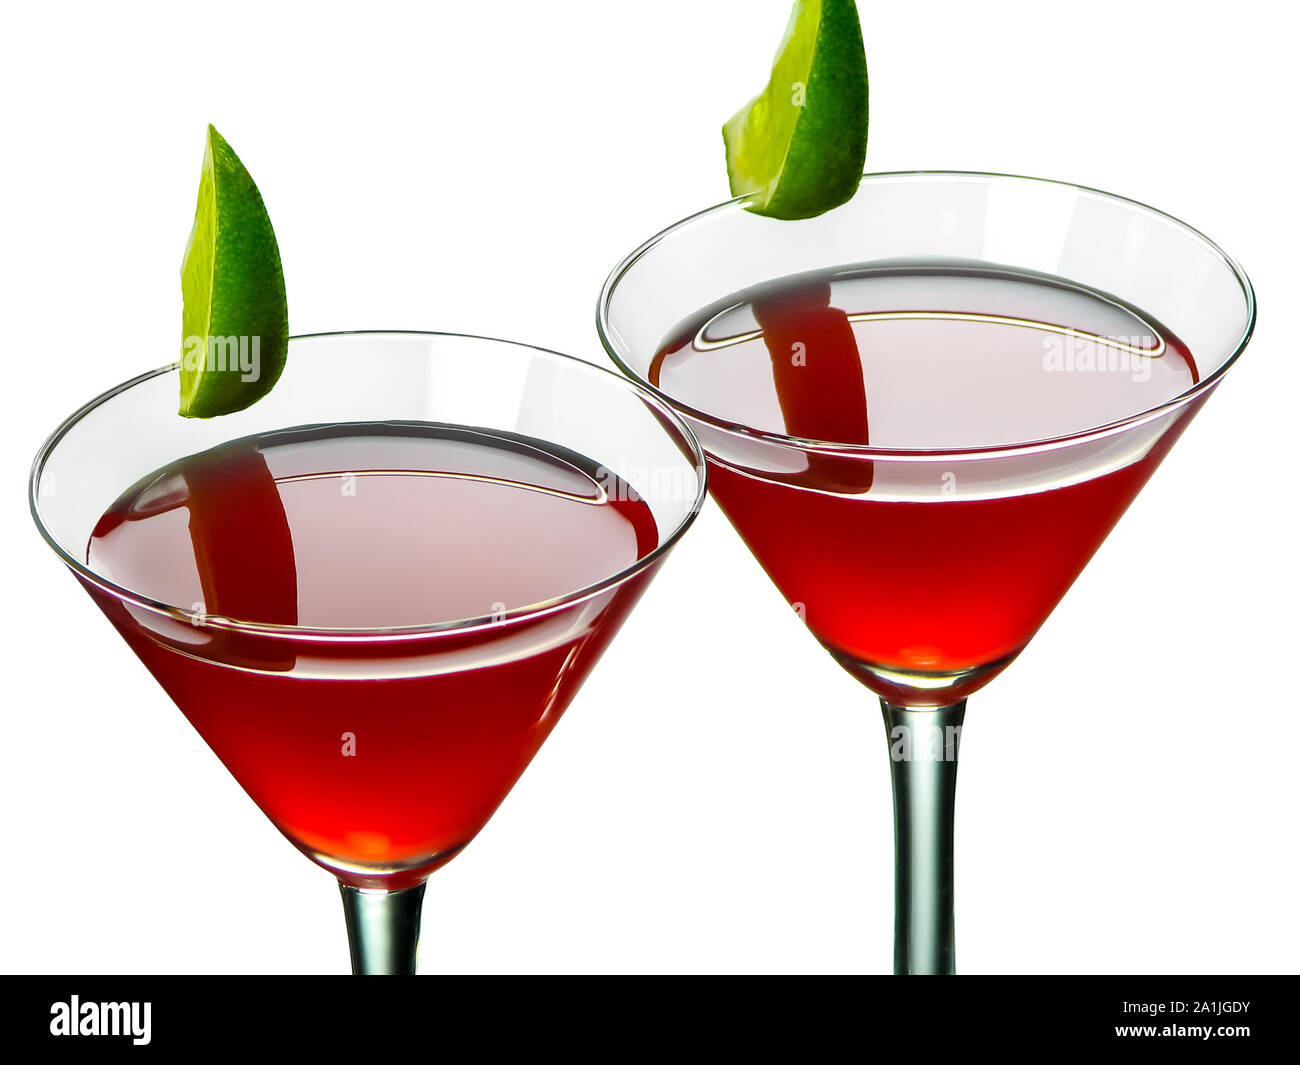 Bright red Bacardi alcoholic cocktail made of white rum, lime juice and grenadine, in two conical cocktail glasses decorated with lime slices Stock Photo